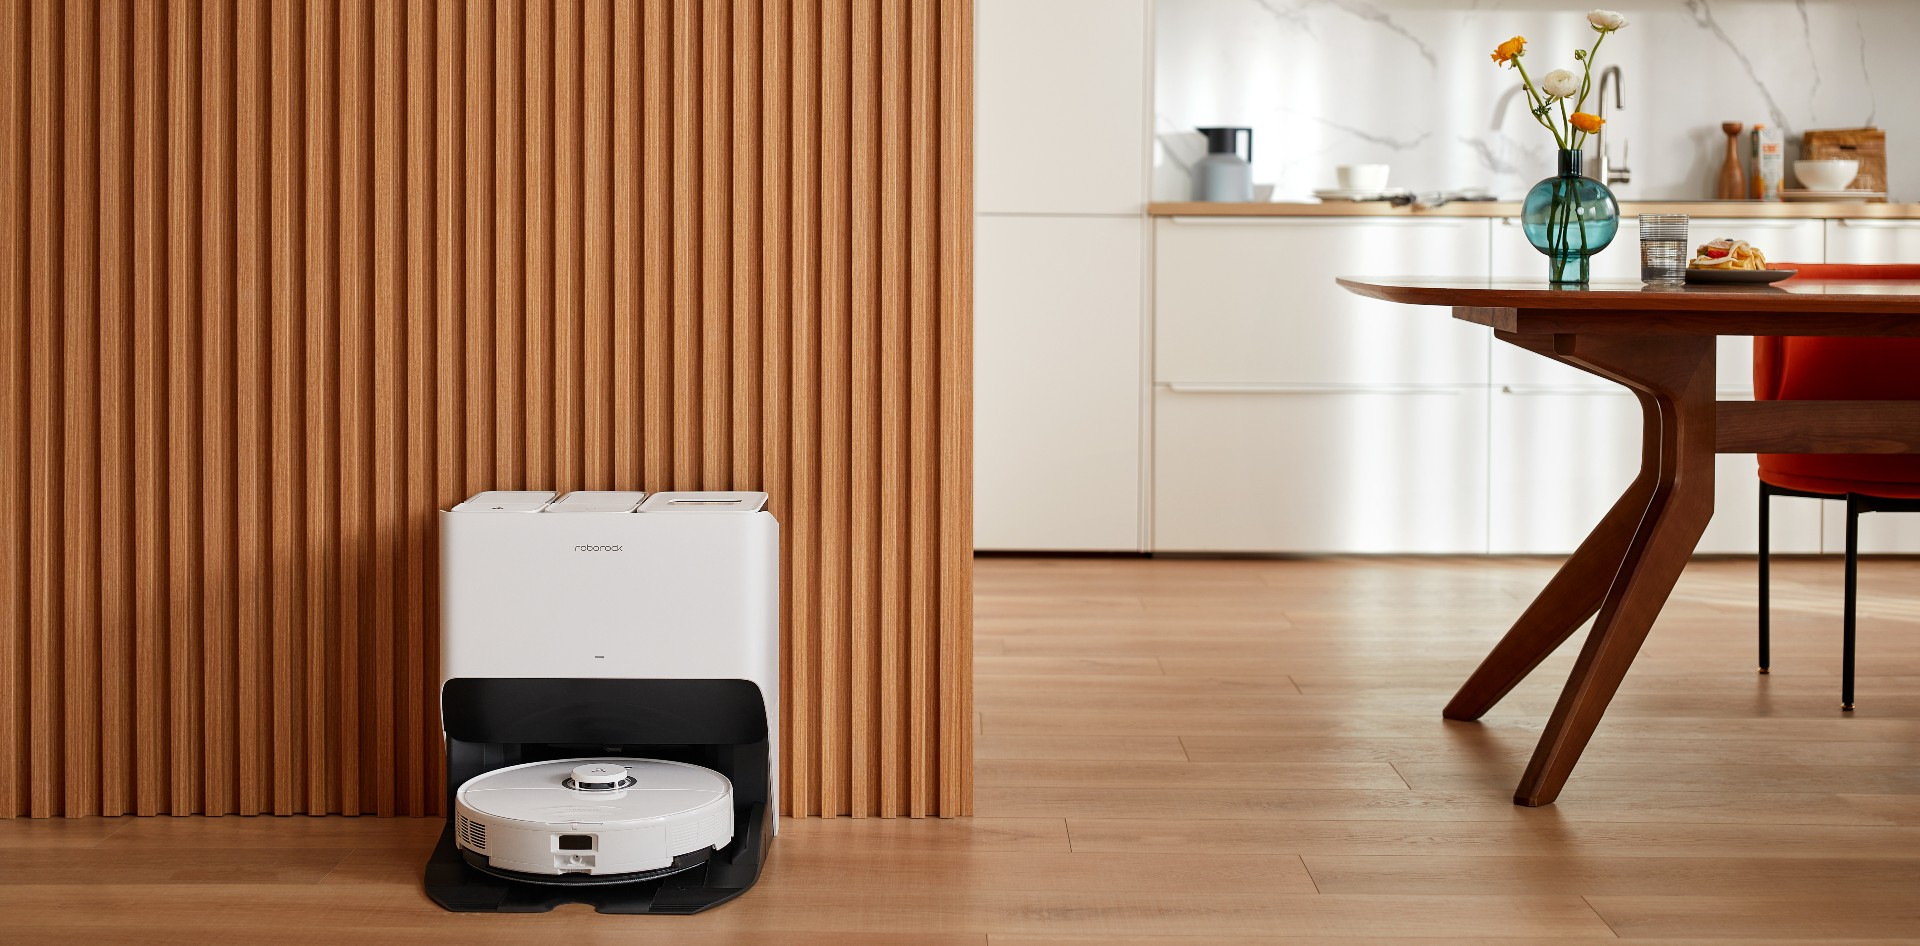 The high-tech Roborock S8 Pro Ultra is an elegant way to clean